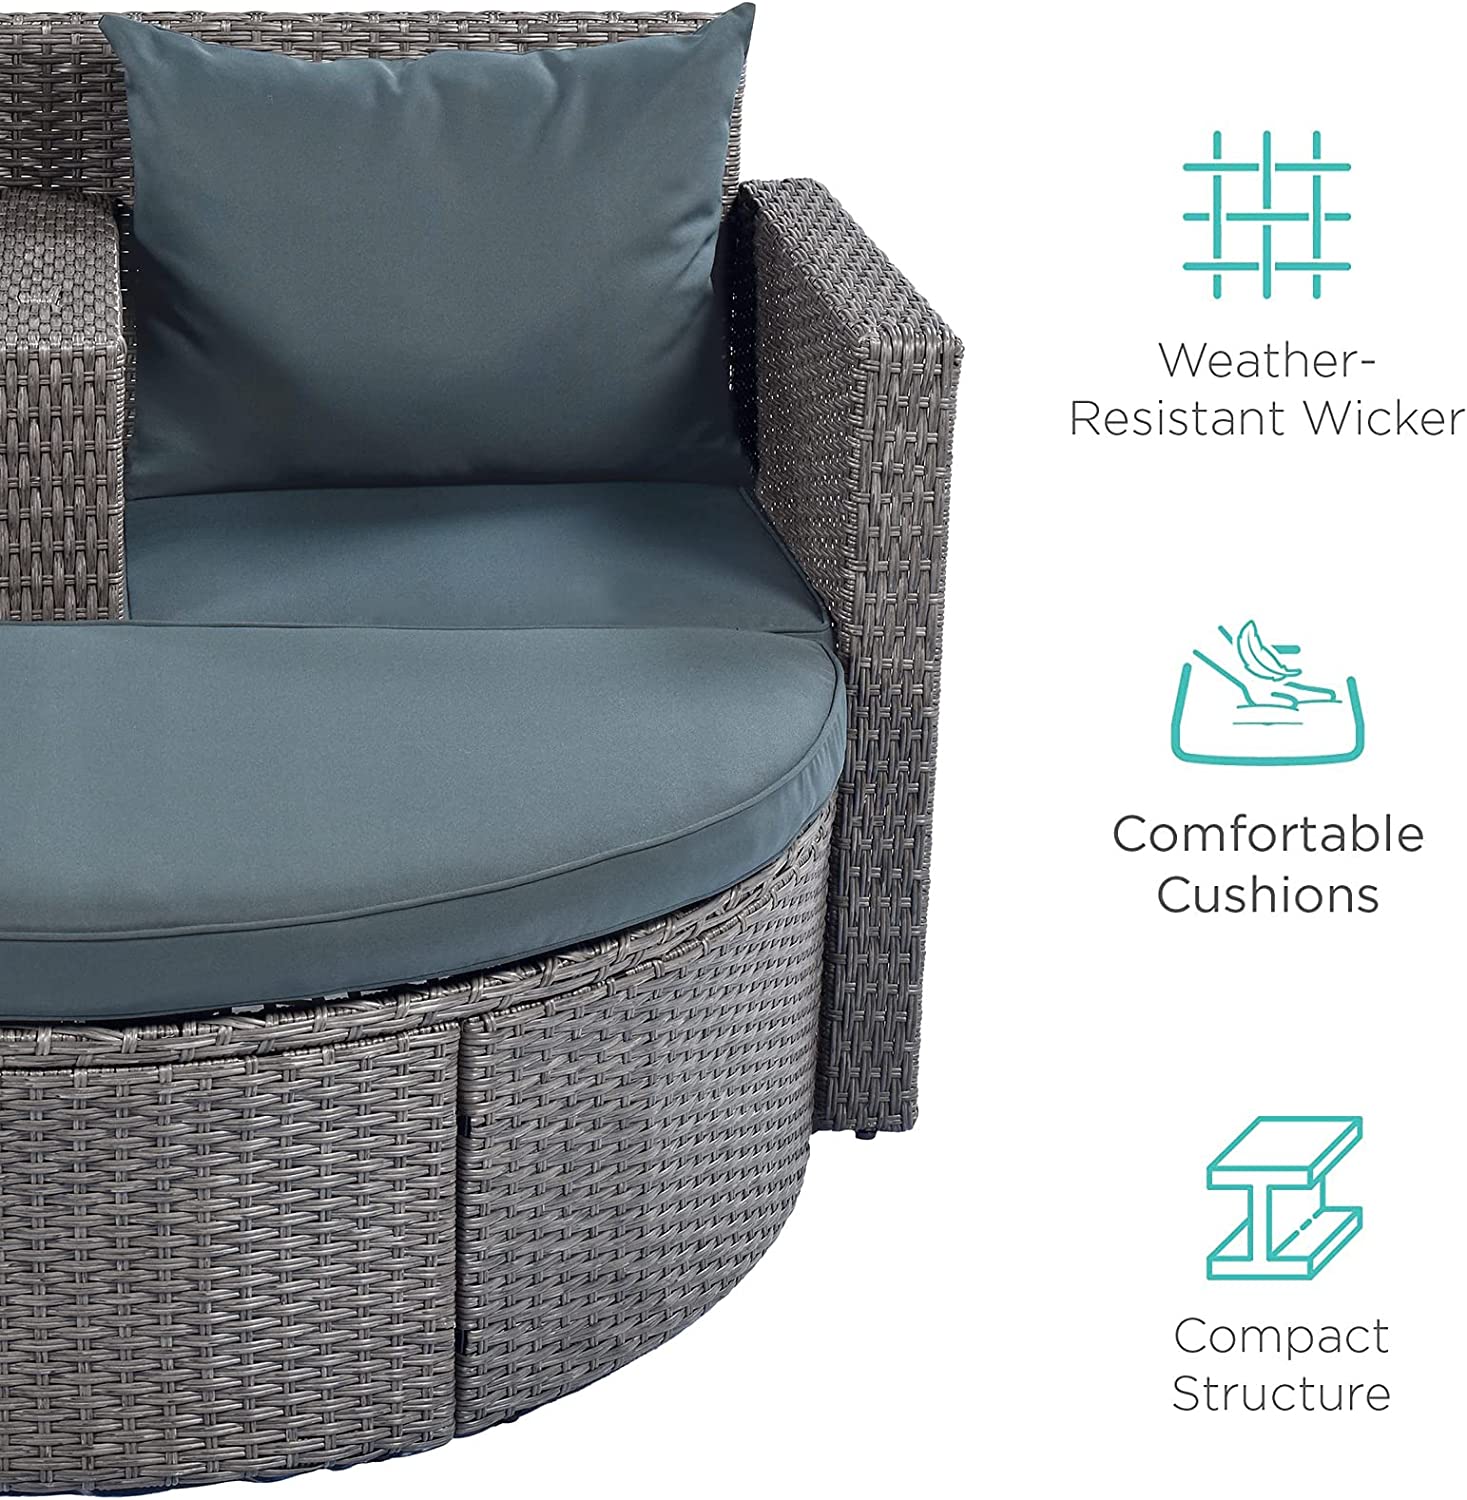 Outdoor Garden Patio Sofa Sets with Side Table for Umbrella, SEGMART Newest 2 Pieces Wicker Patio Furniture Set with Removable Seat Cushions & Half-Moon Sofa for Porch, Backyard, 300lbs, S1542 - image 5 of 9